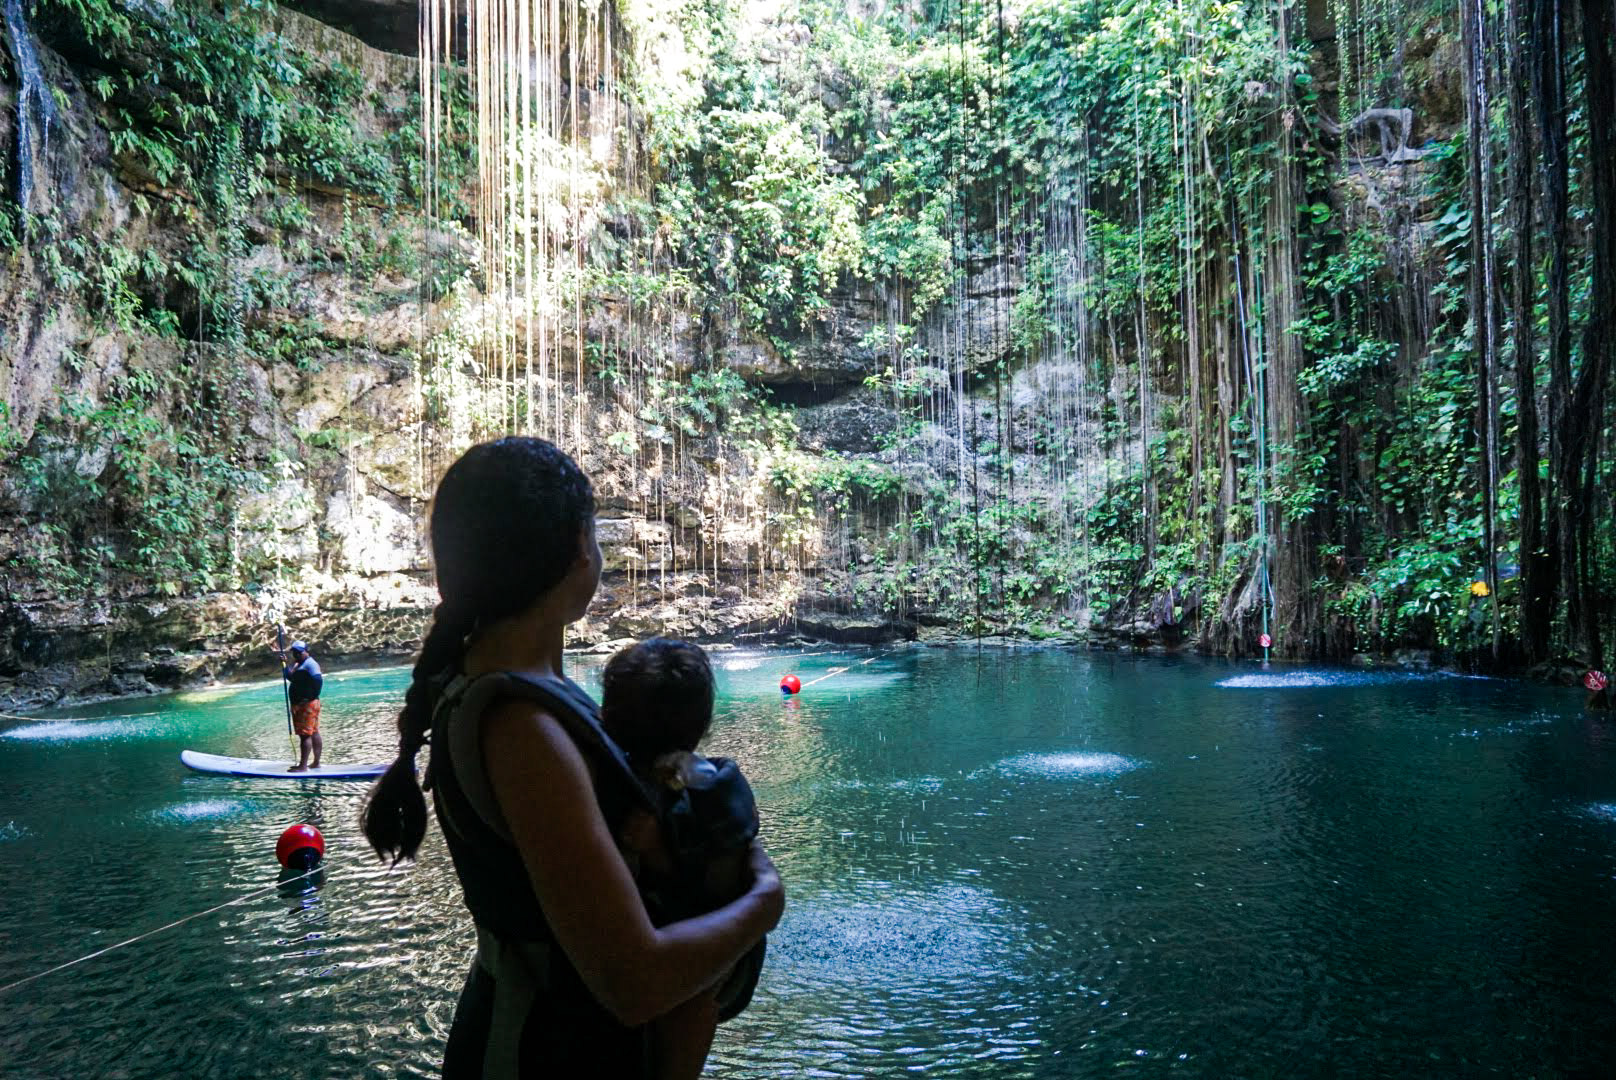 Visiting Yucatan cenotes with a baby and toddler